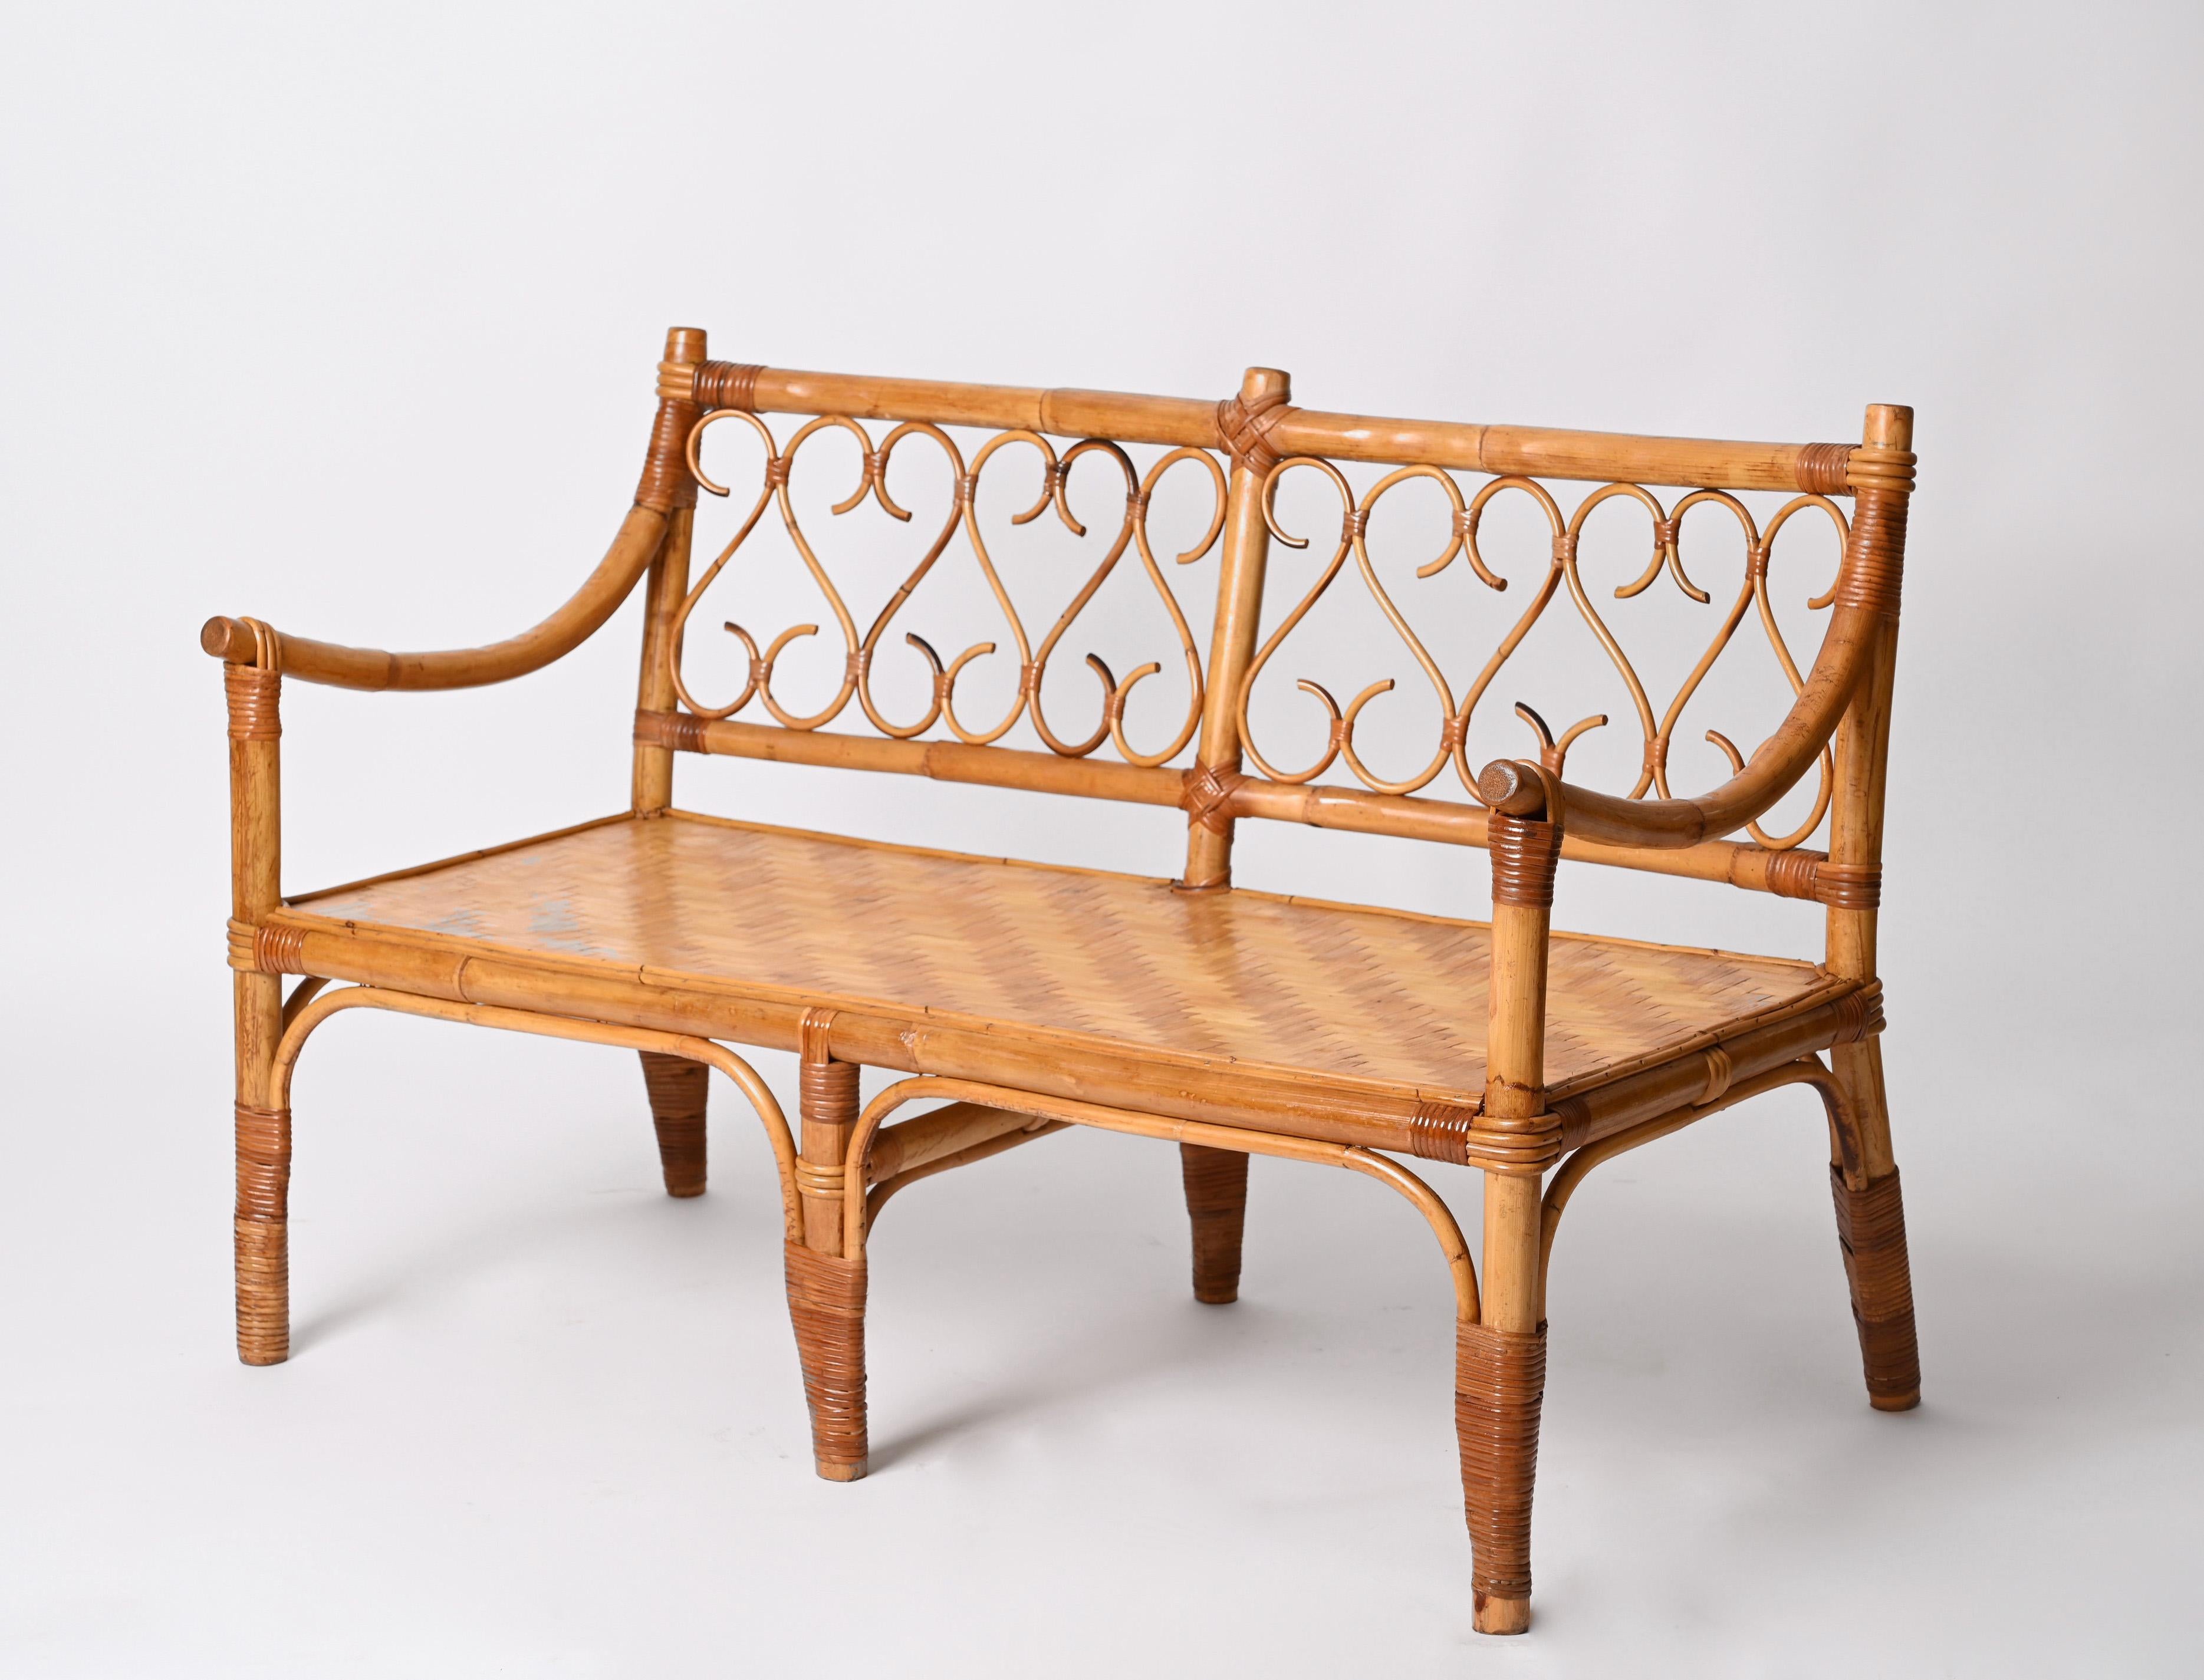 Iconic Mid-Century Modern two-seat sofa in bamboo and rattan. This amazing piece was produced in Italy during 1970s. 

This wonderful hand-crafted settee has a structure in curved and woven rattan and it is in great vintage conditions.

A